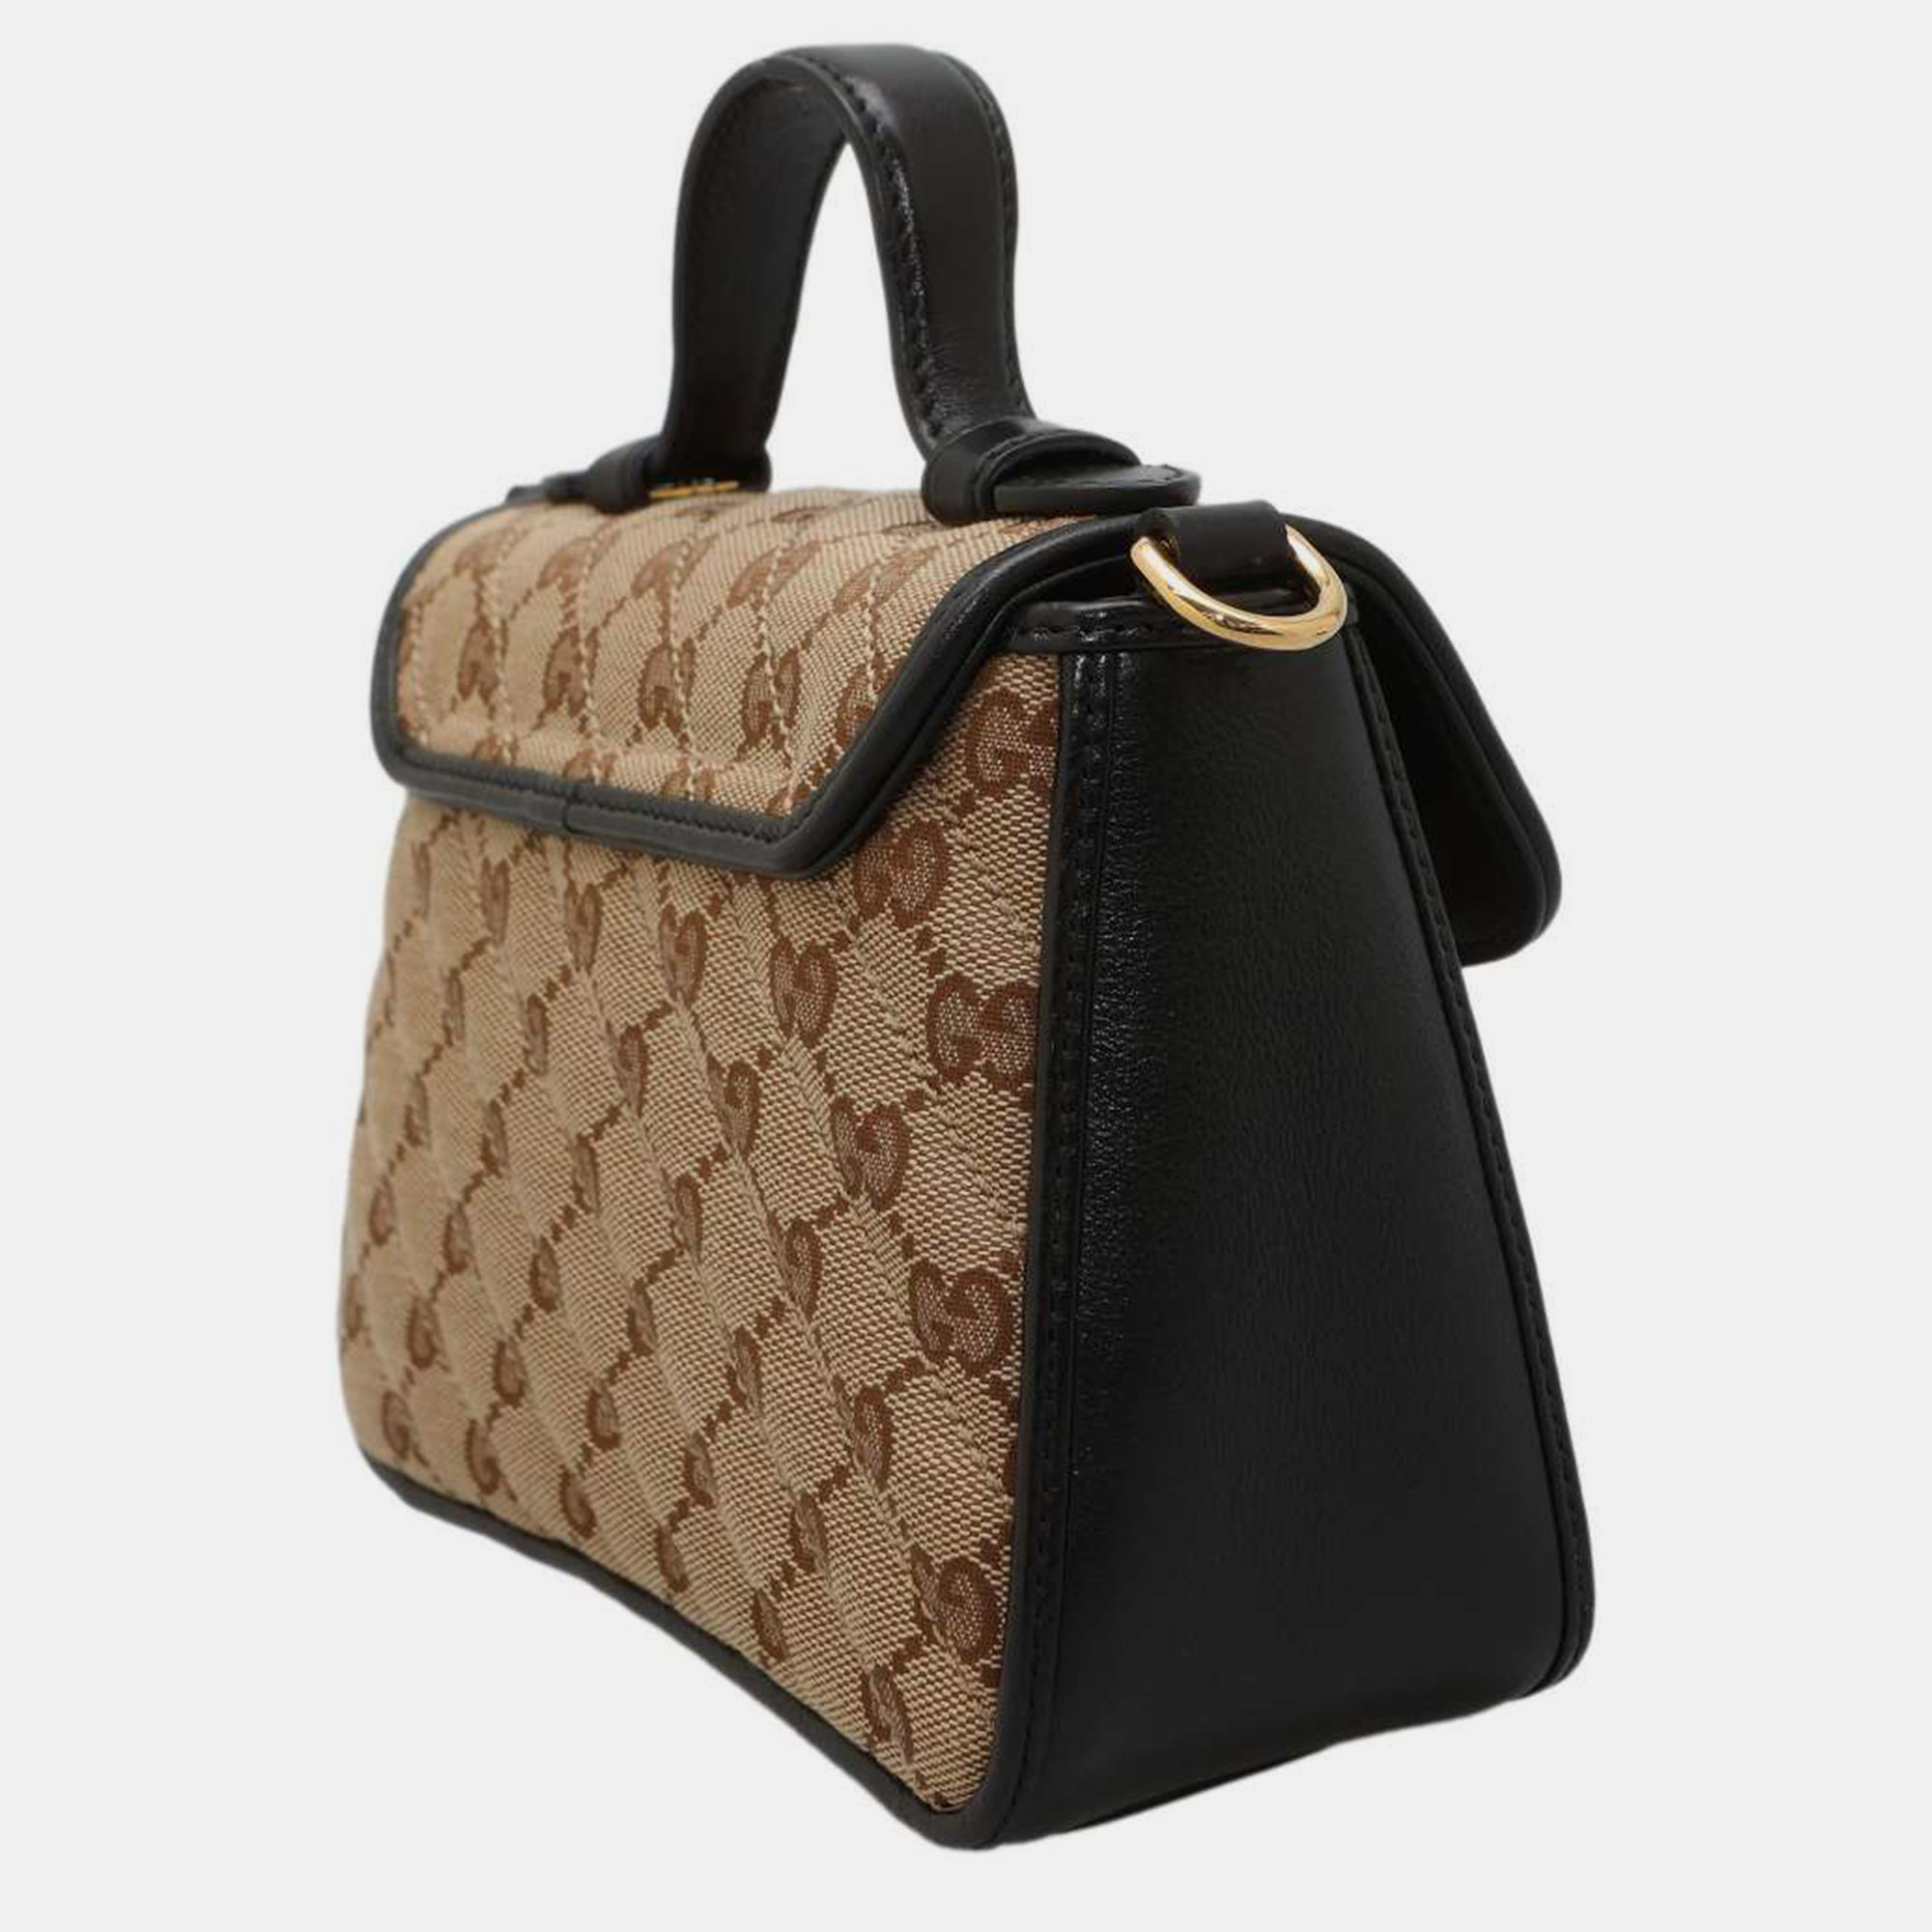 Gucci Beige GG Canvas And Leather GG Marmont Top Handle Bag